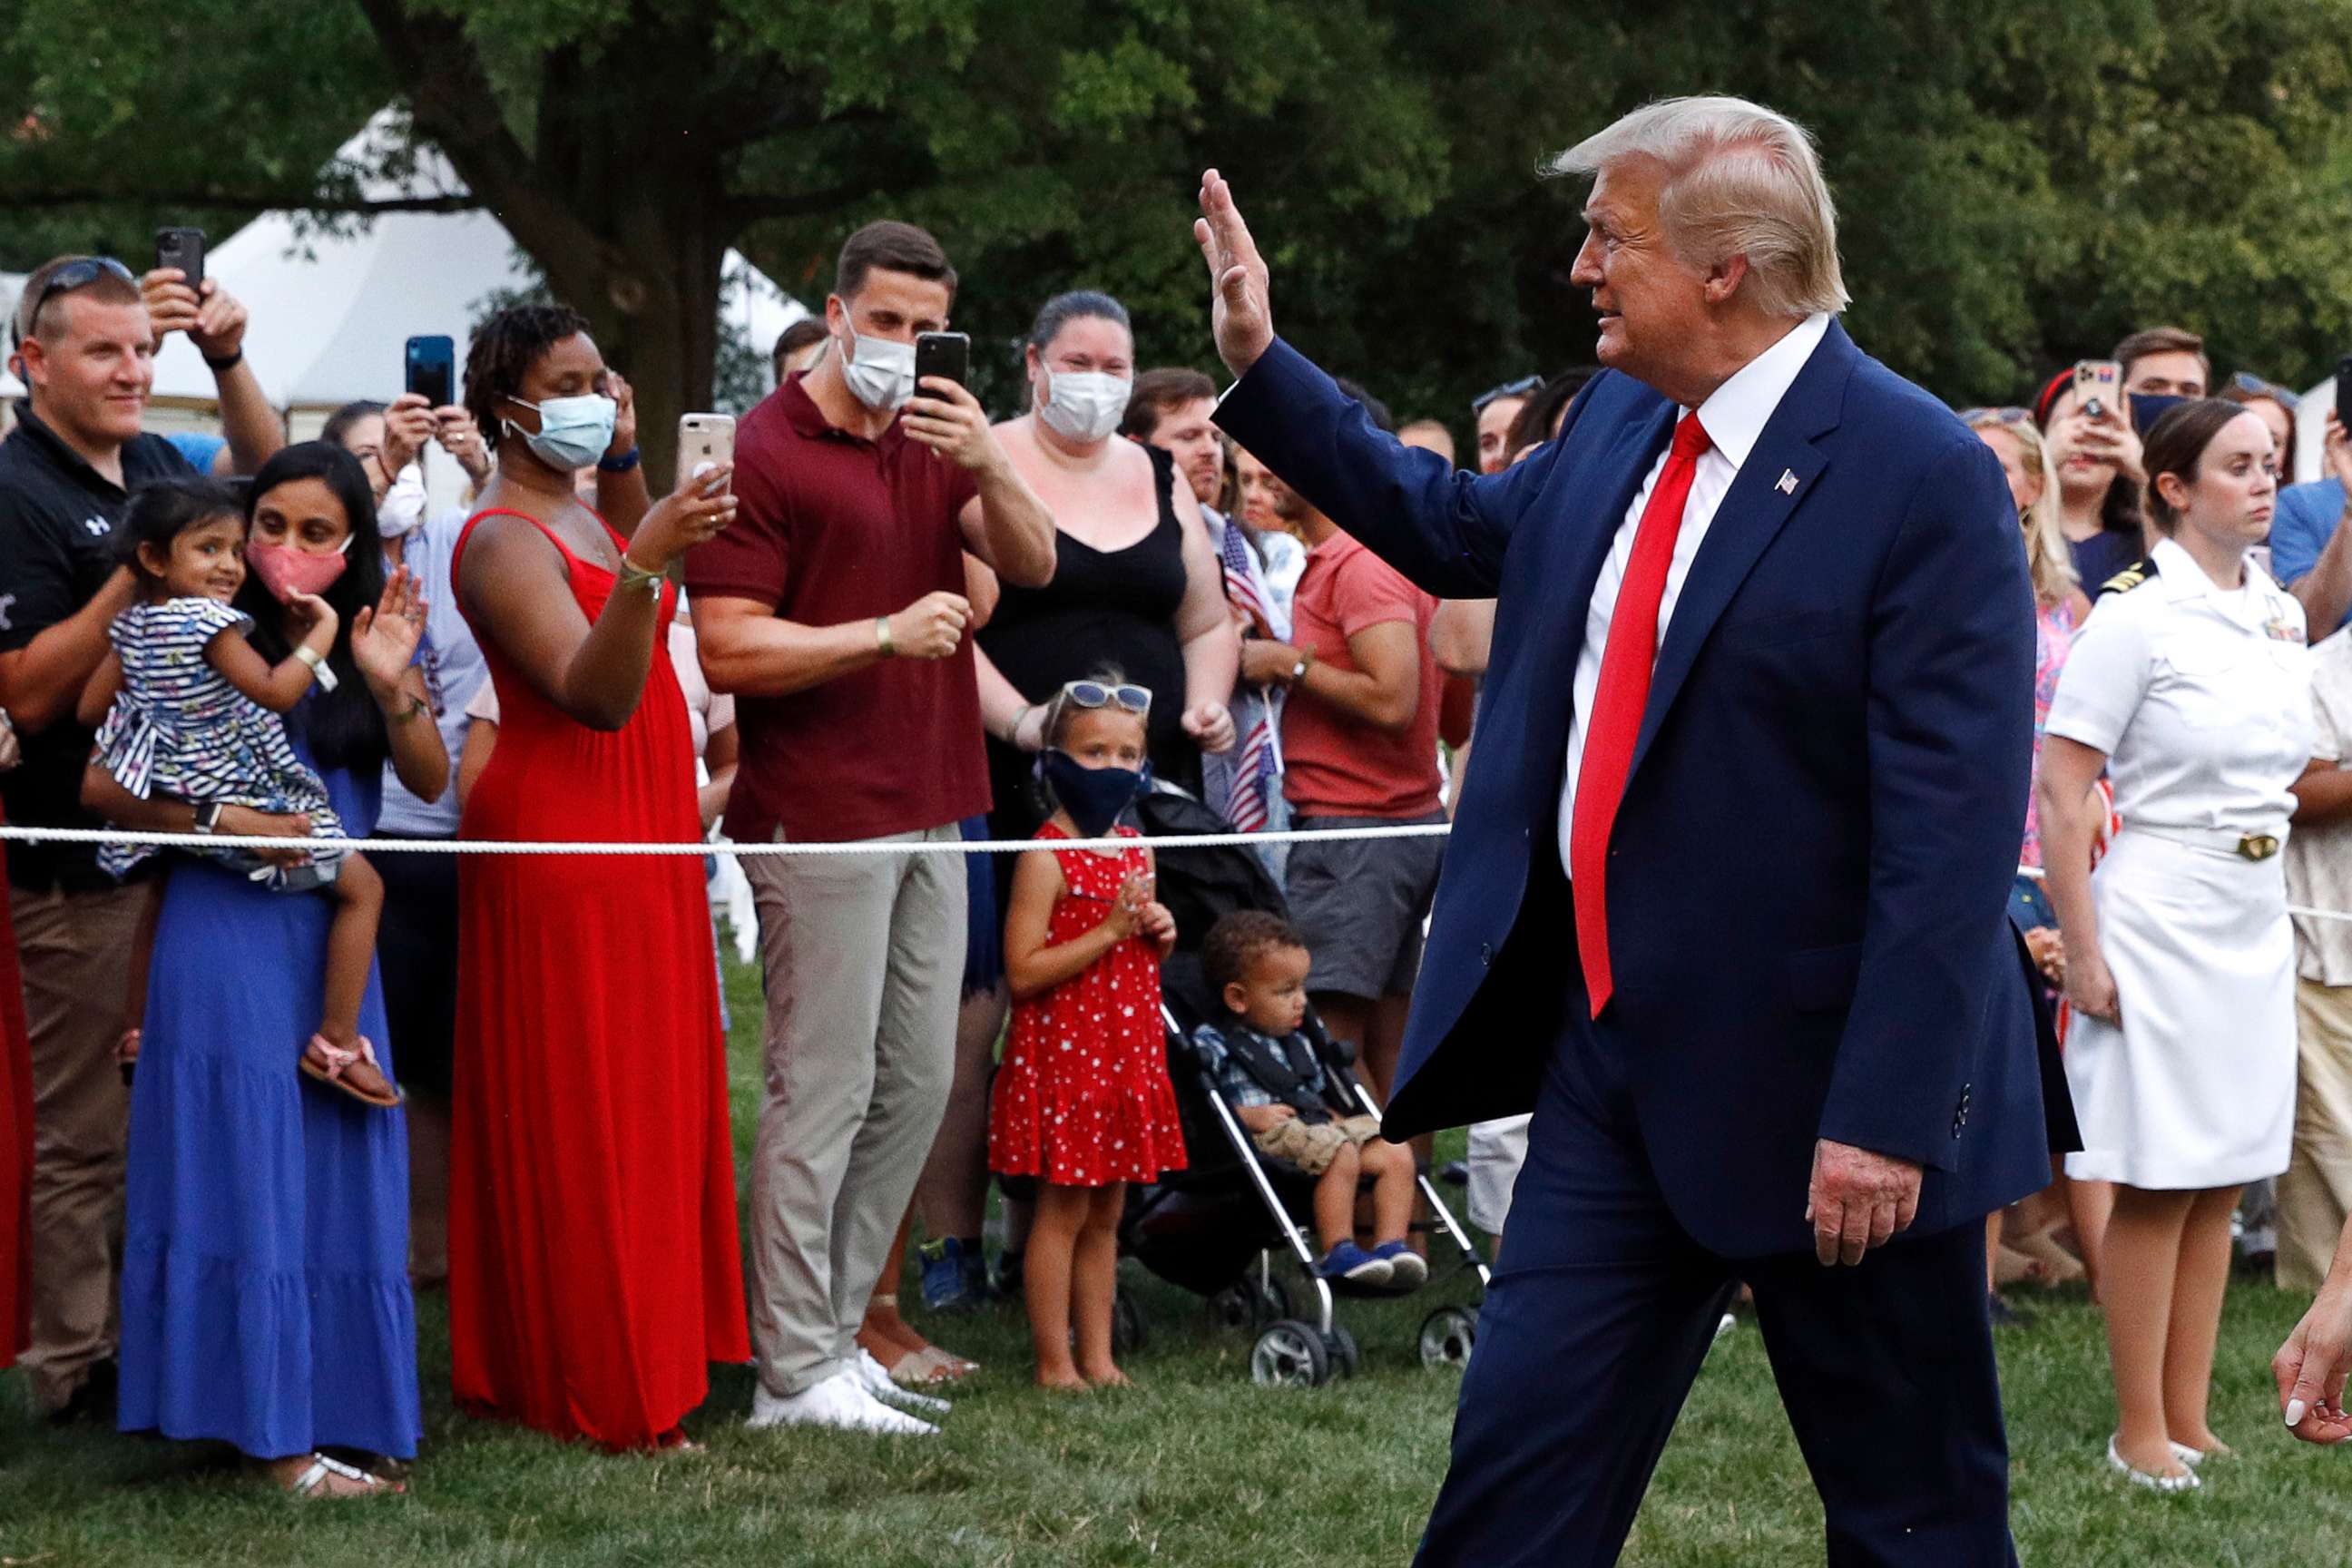 PHOTO: President Donald Trump greets visitors as he walks on the South Lawn of the White House during a "Salute to America" event, Saturday, July 4, 2020, in Washington.